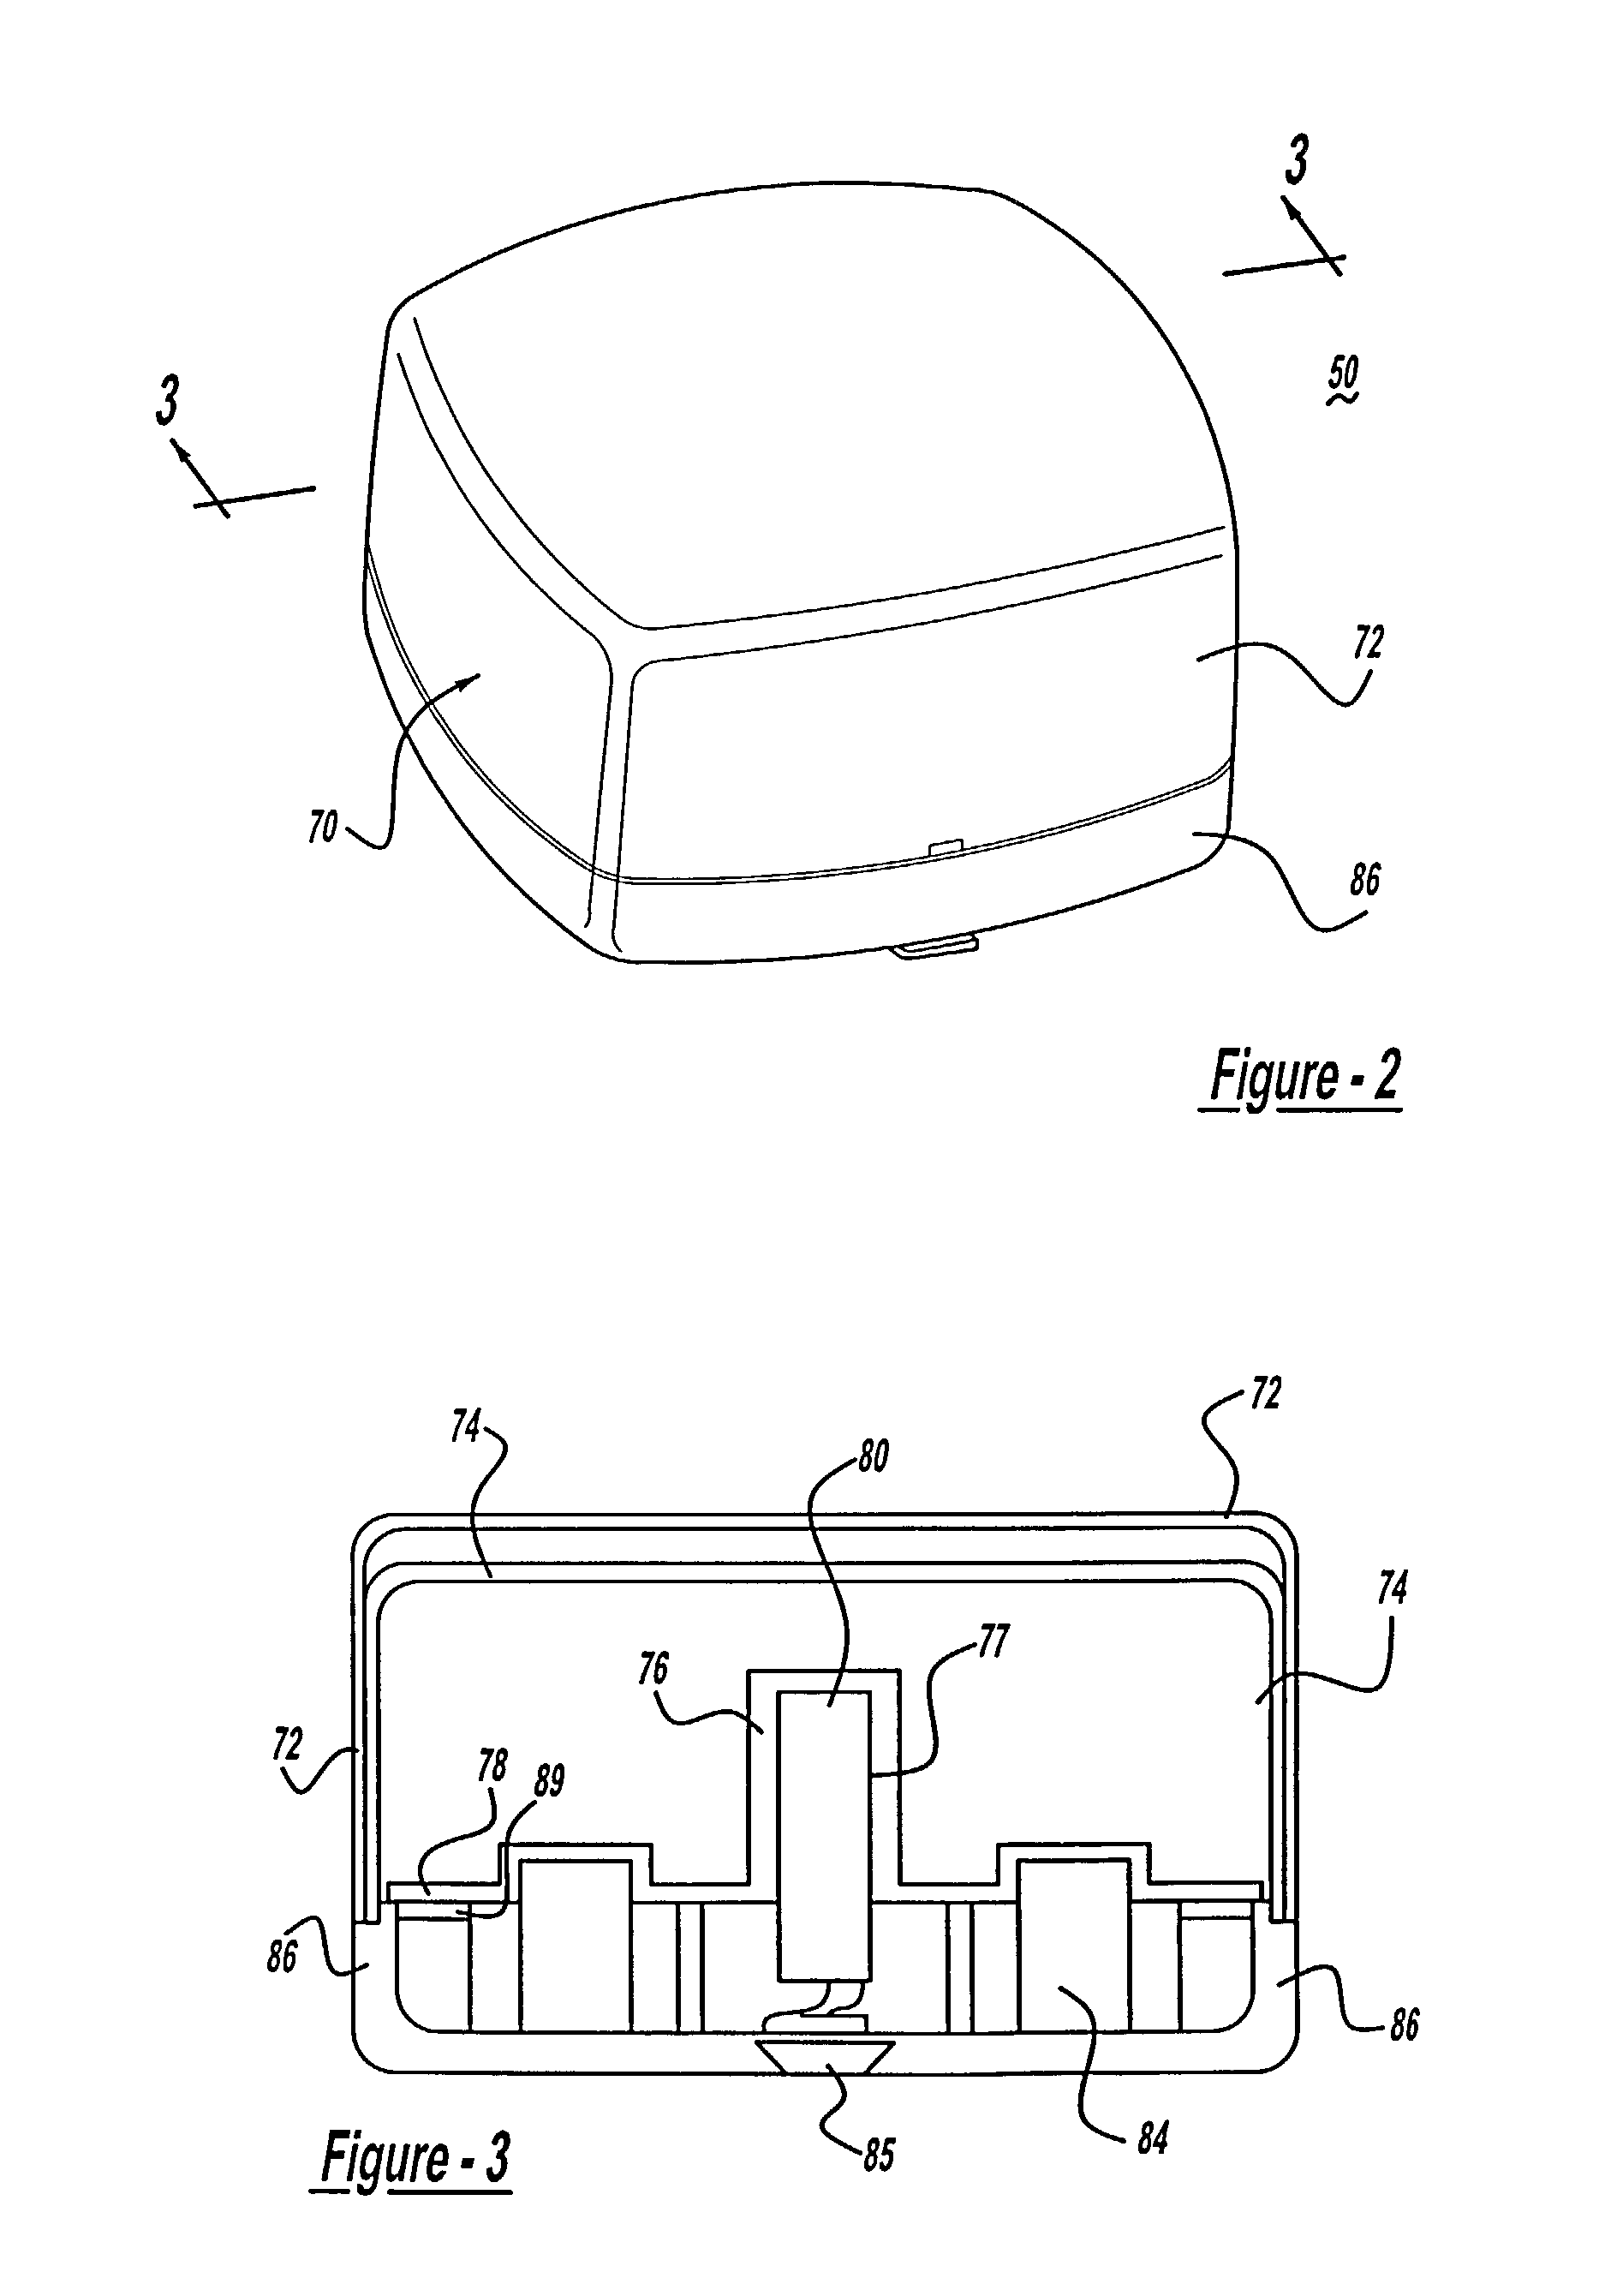 Wireless method for monitoring and controlling food temperature